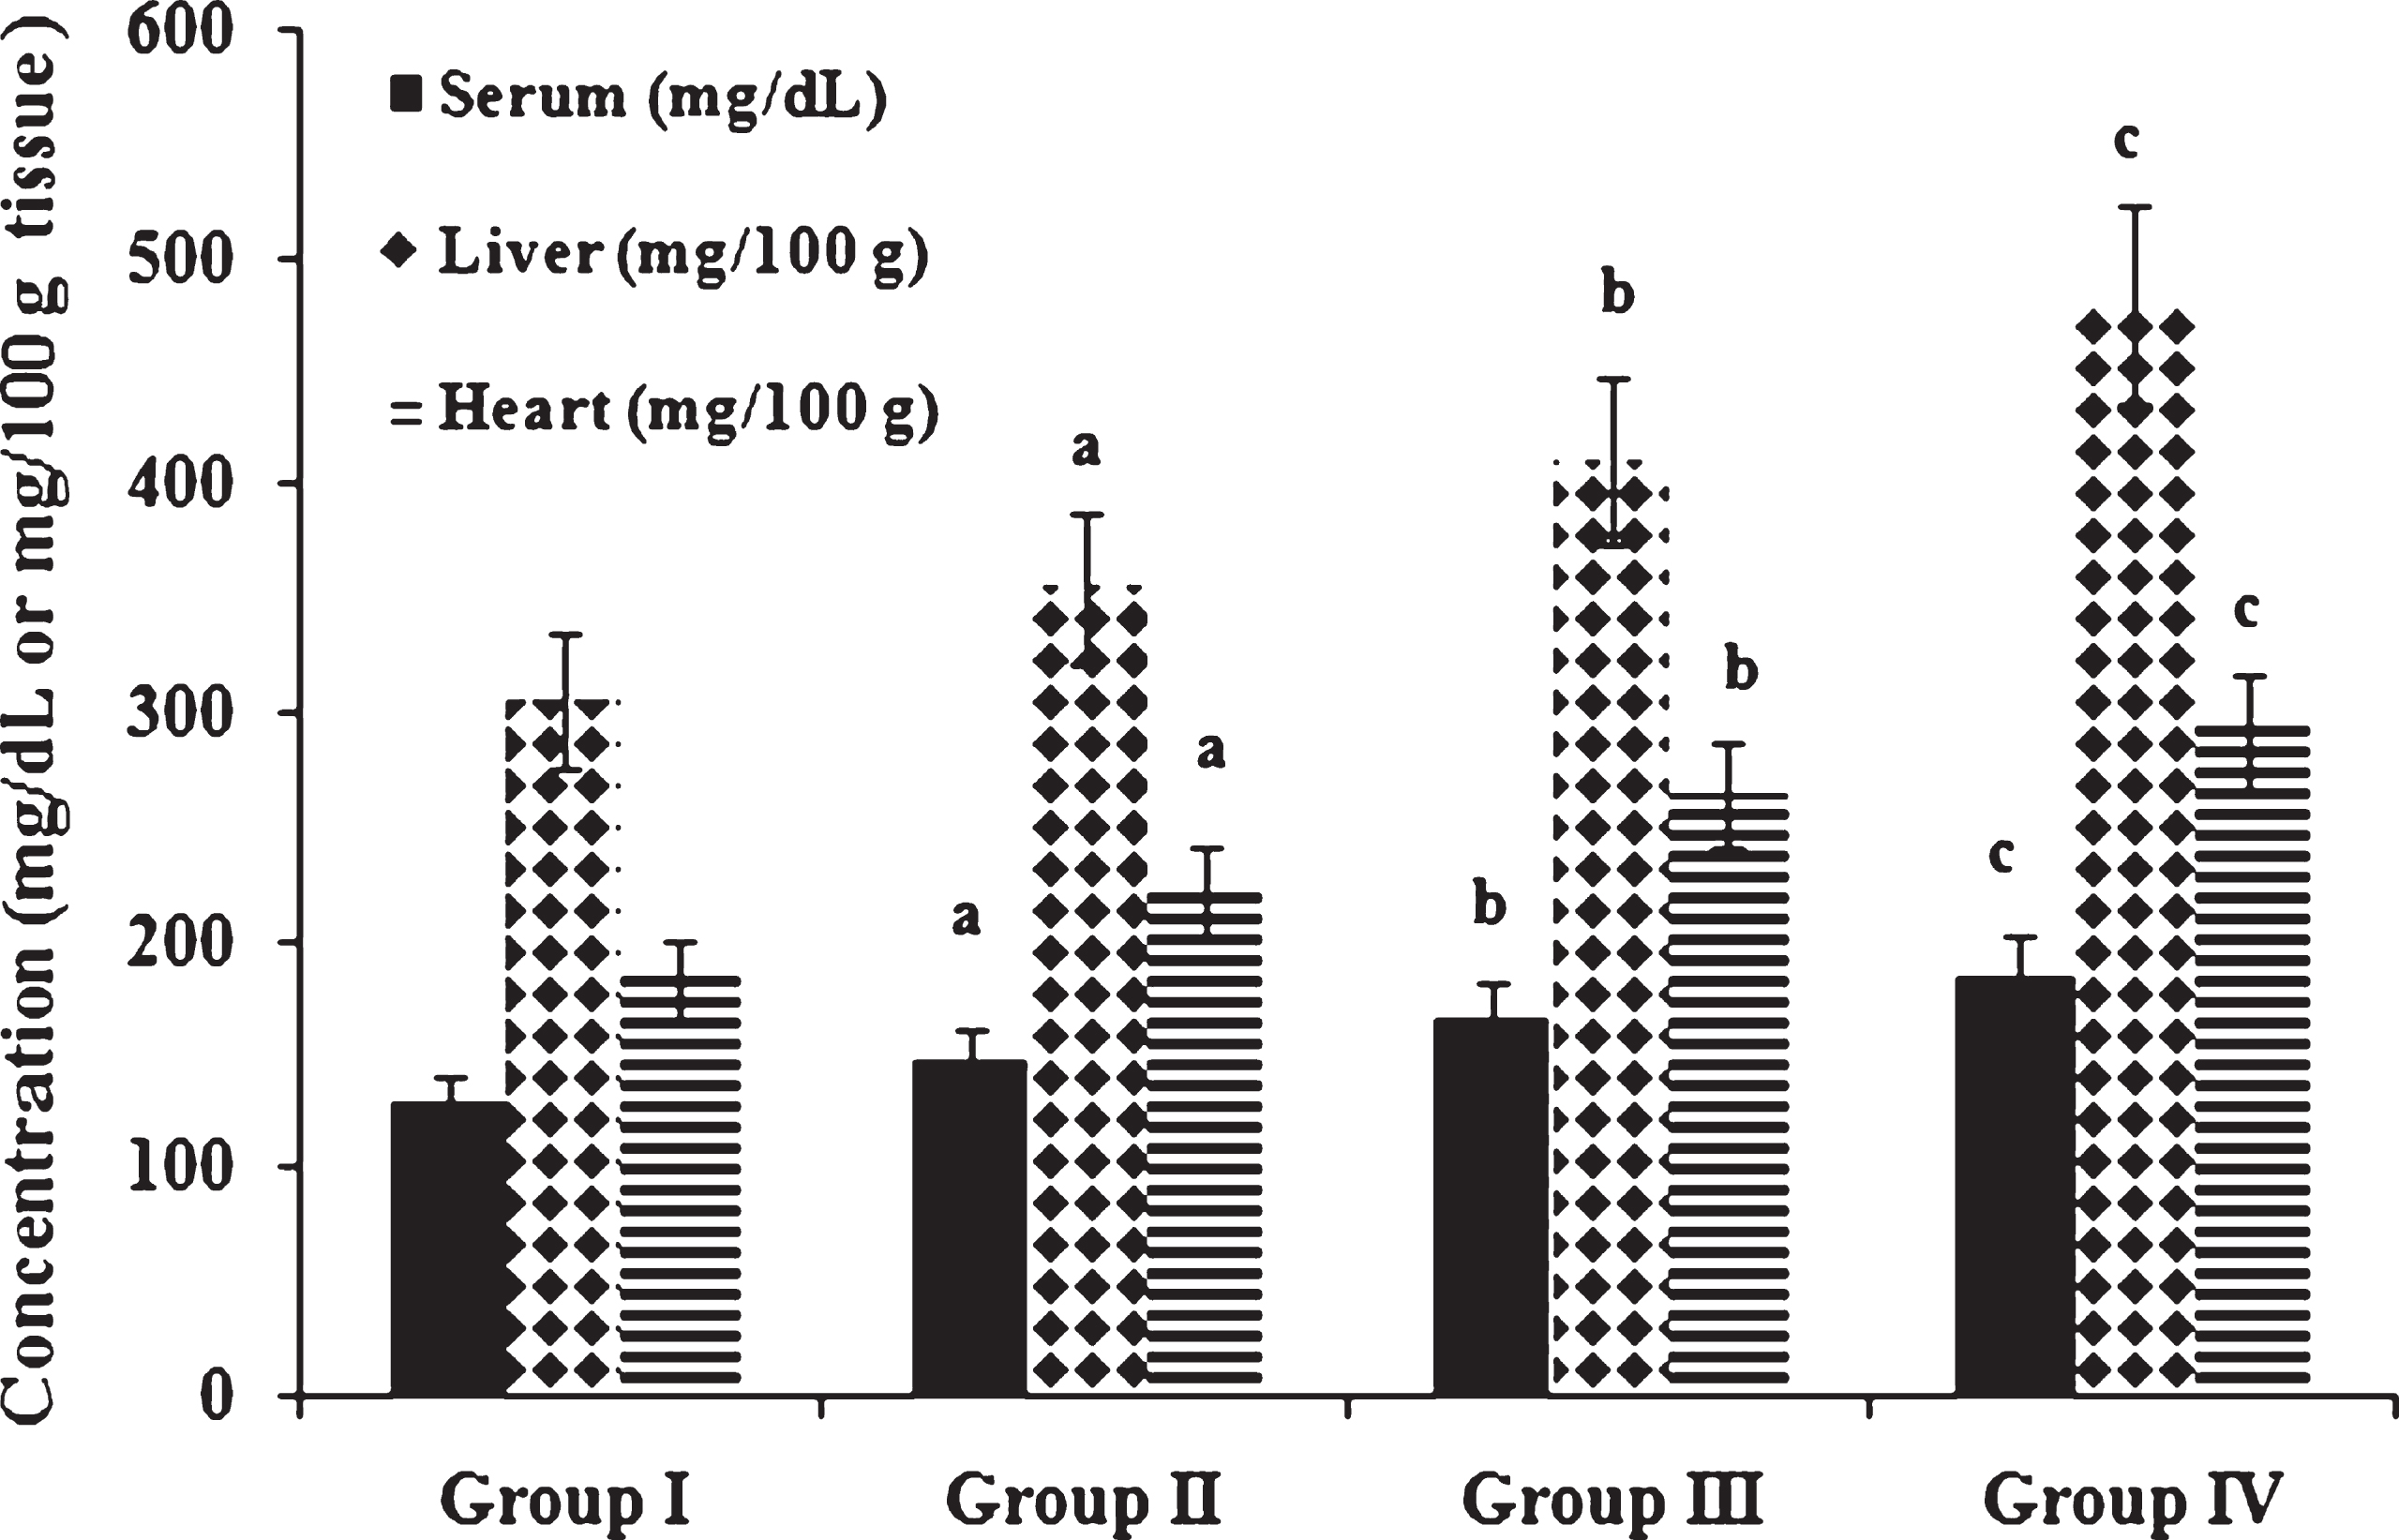 Concentration of cholesterol in serum and tissues. Values expressed as mean ± SD of six estimations. aindicates values are significantly different from group I. bindicates values are significantly different from group II. cindicates values are significantly different from group III. Significance accepted at p < 0.05.